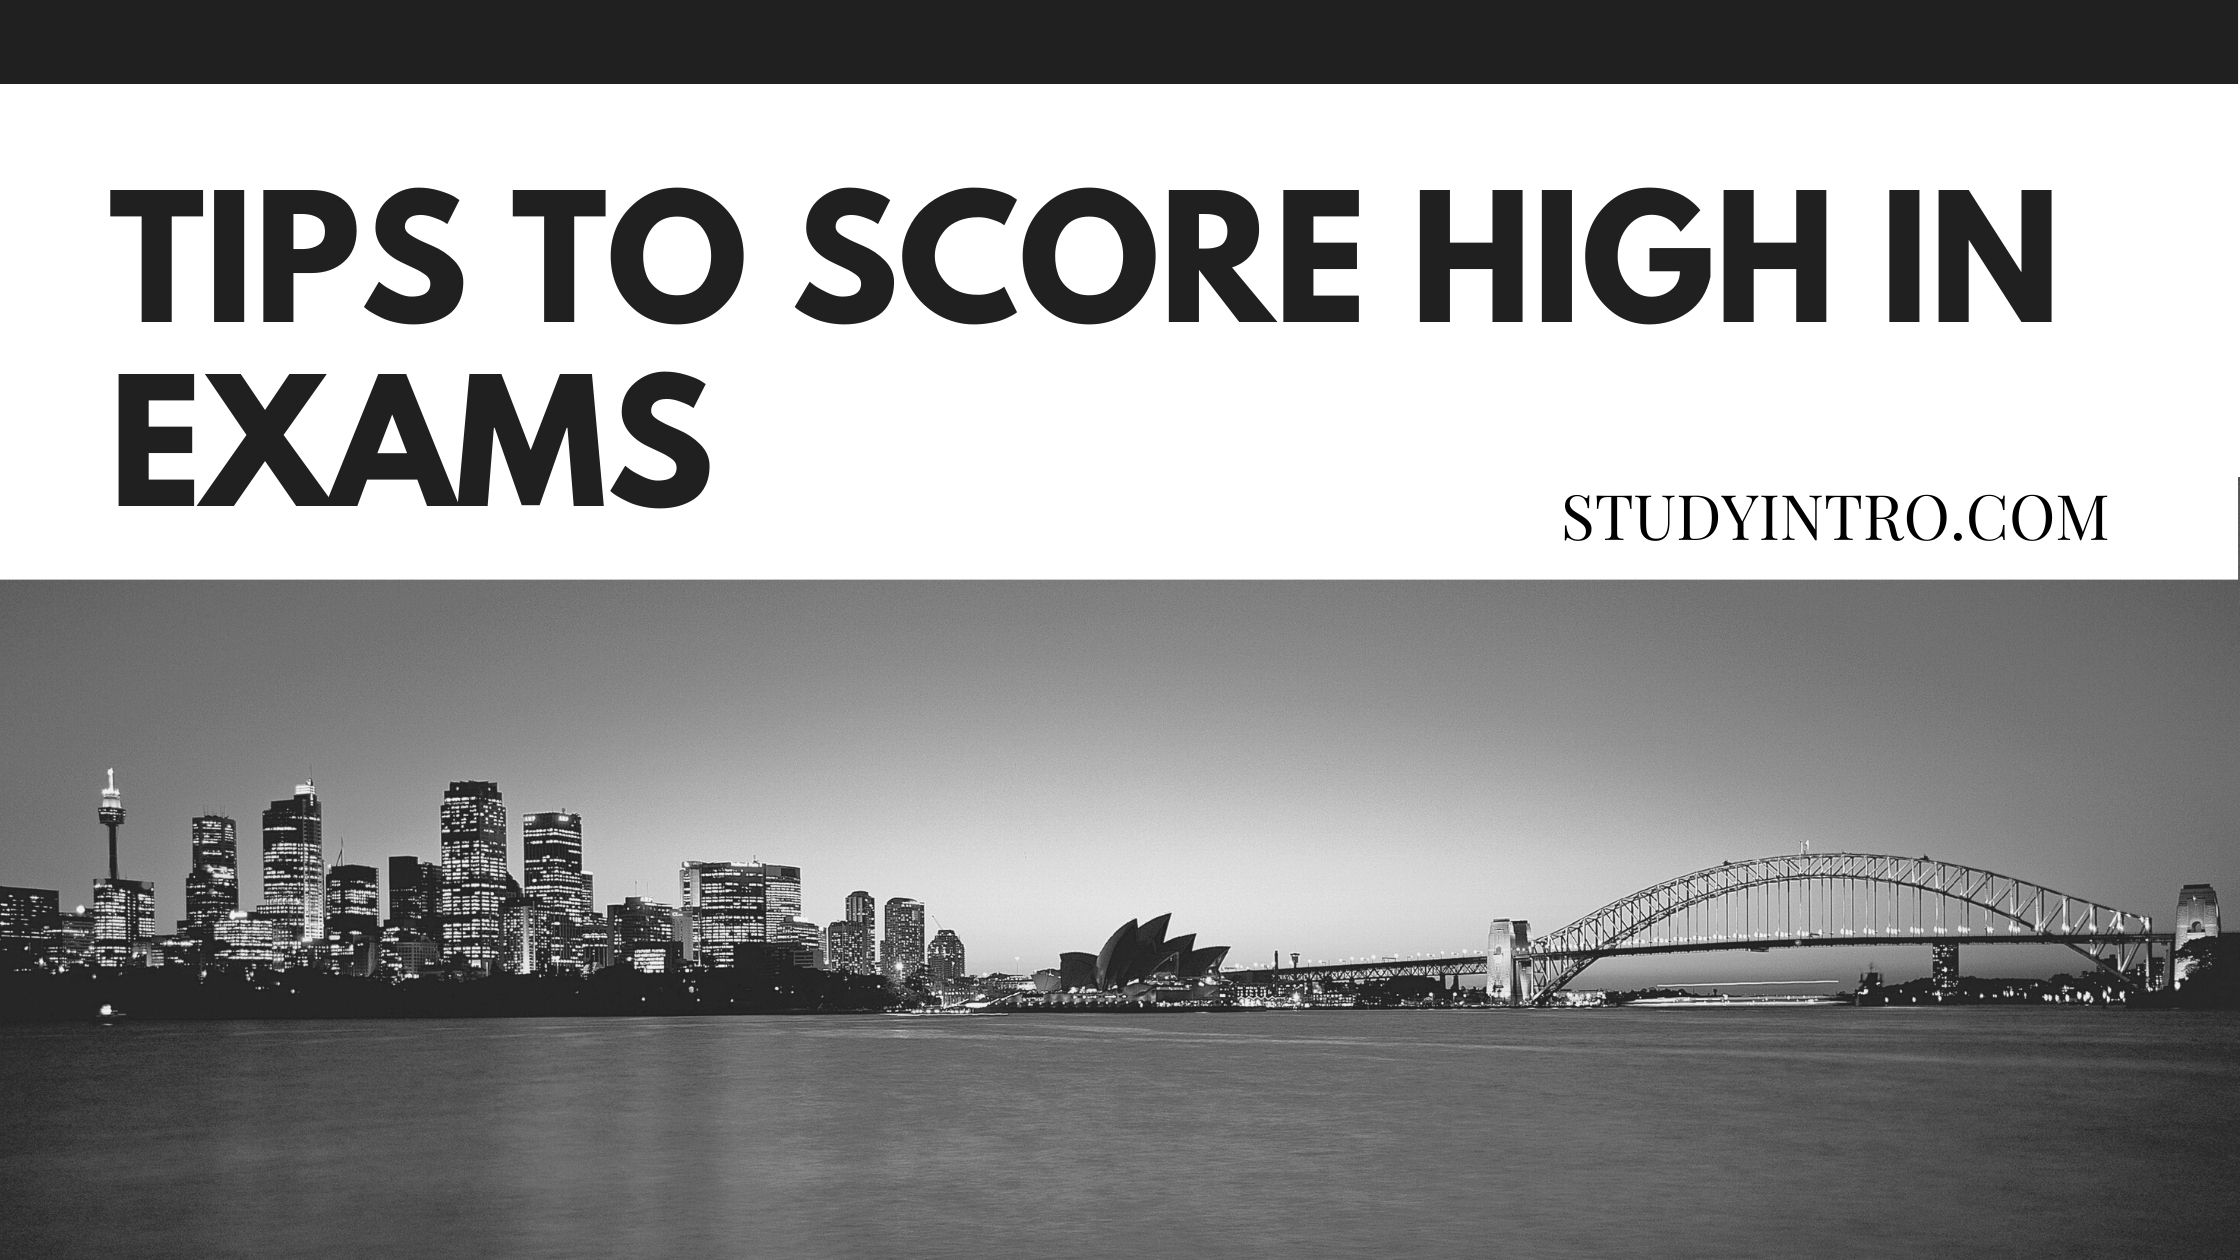 Tips to Score High